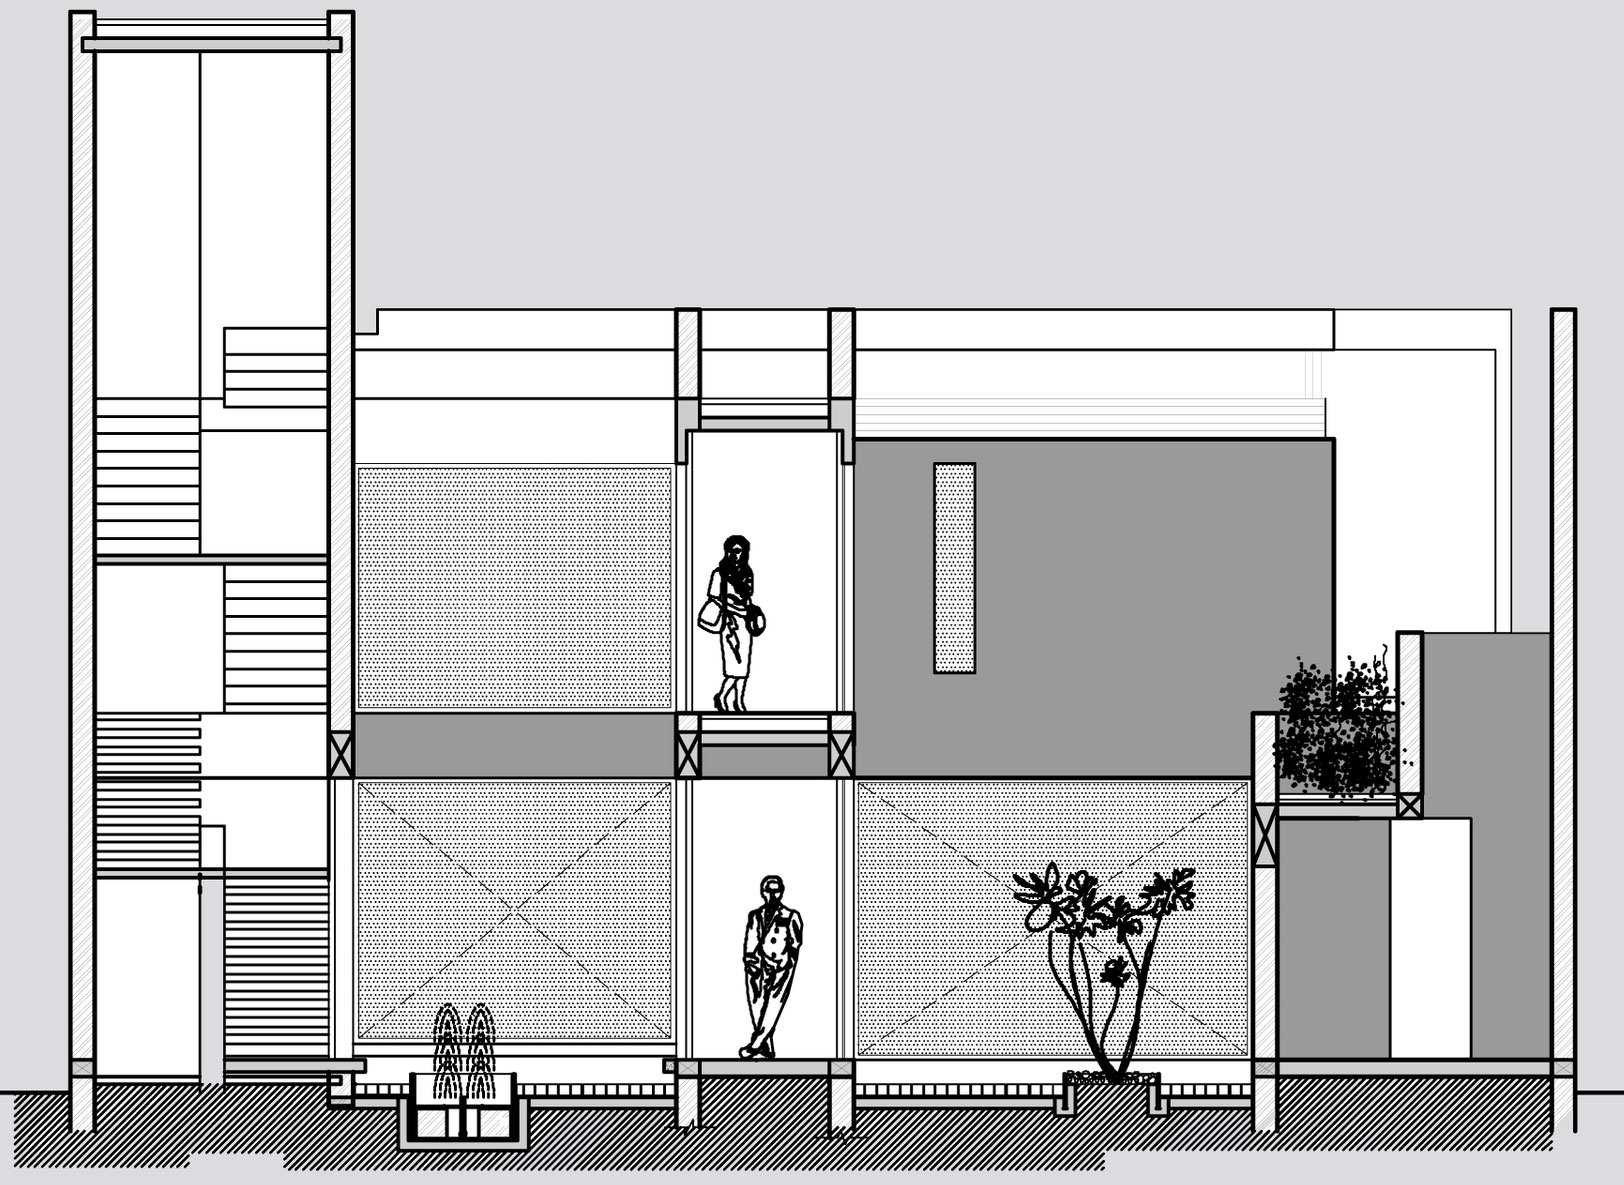 Section A House Sketch Section A Twin Coutyard House Modern Design Plan Architecture Spacious Modern Home With Large Windows On The Walls